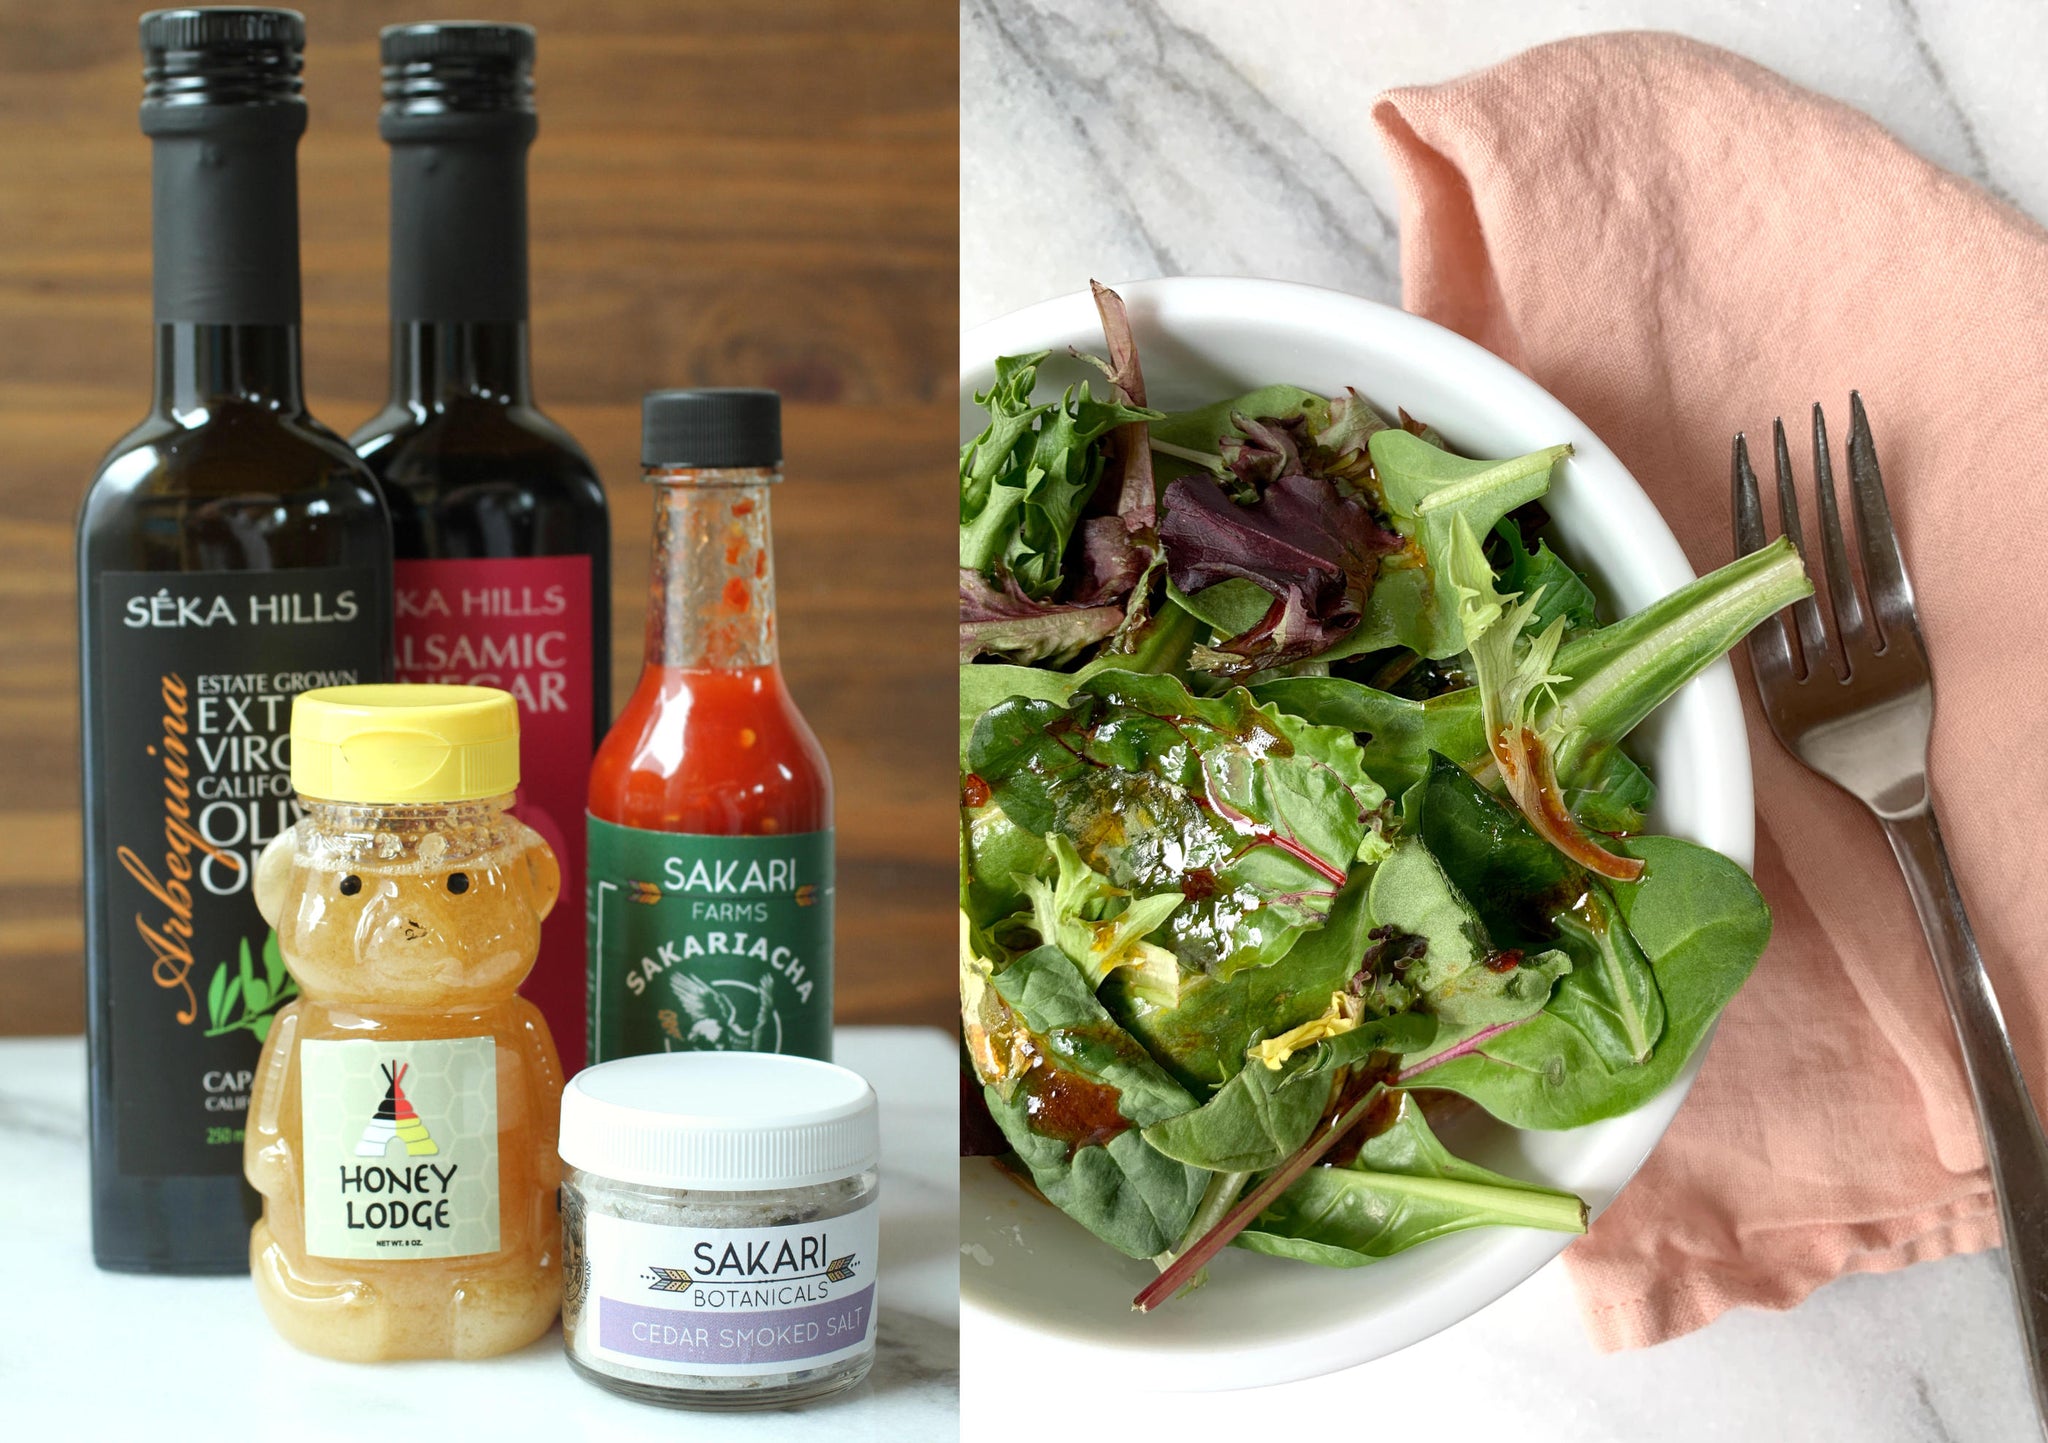 A composite image of the ingredients of the Sweet and Spicy Salad Dressing on the left with the finished product on a green salad on the right.